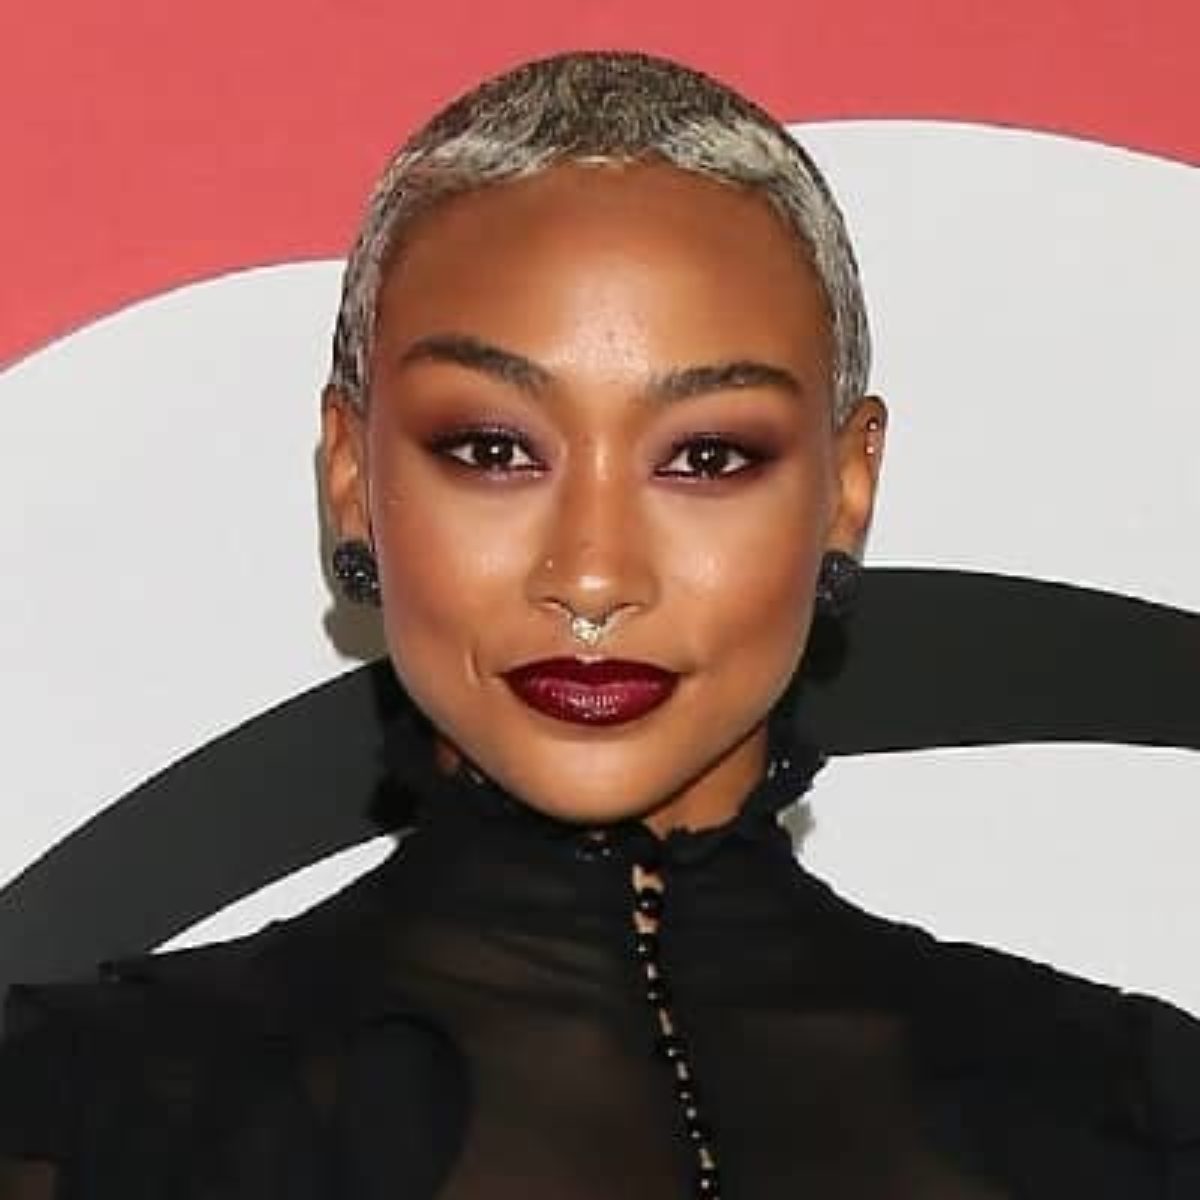 Tati Gabrielle Wiki/Biography, Net Worth, Husband Age, Height, Parents,  Ethnicity and Nationality